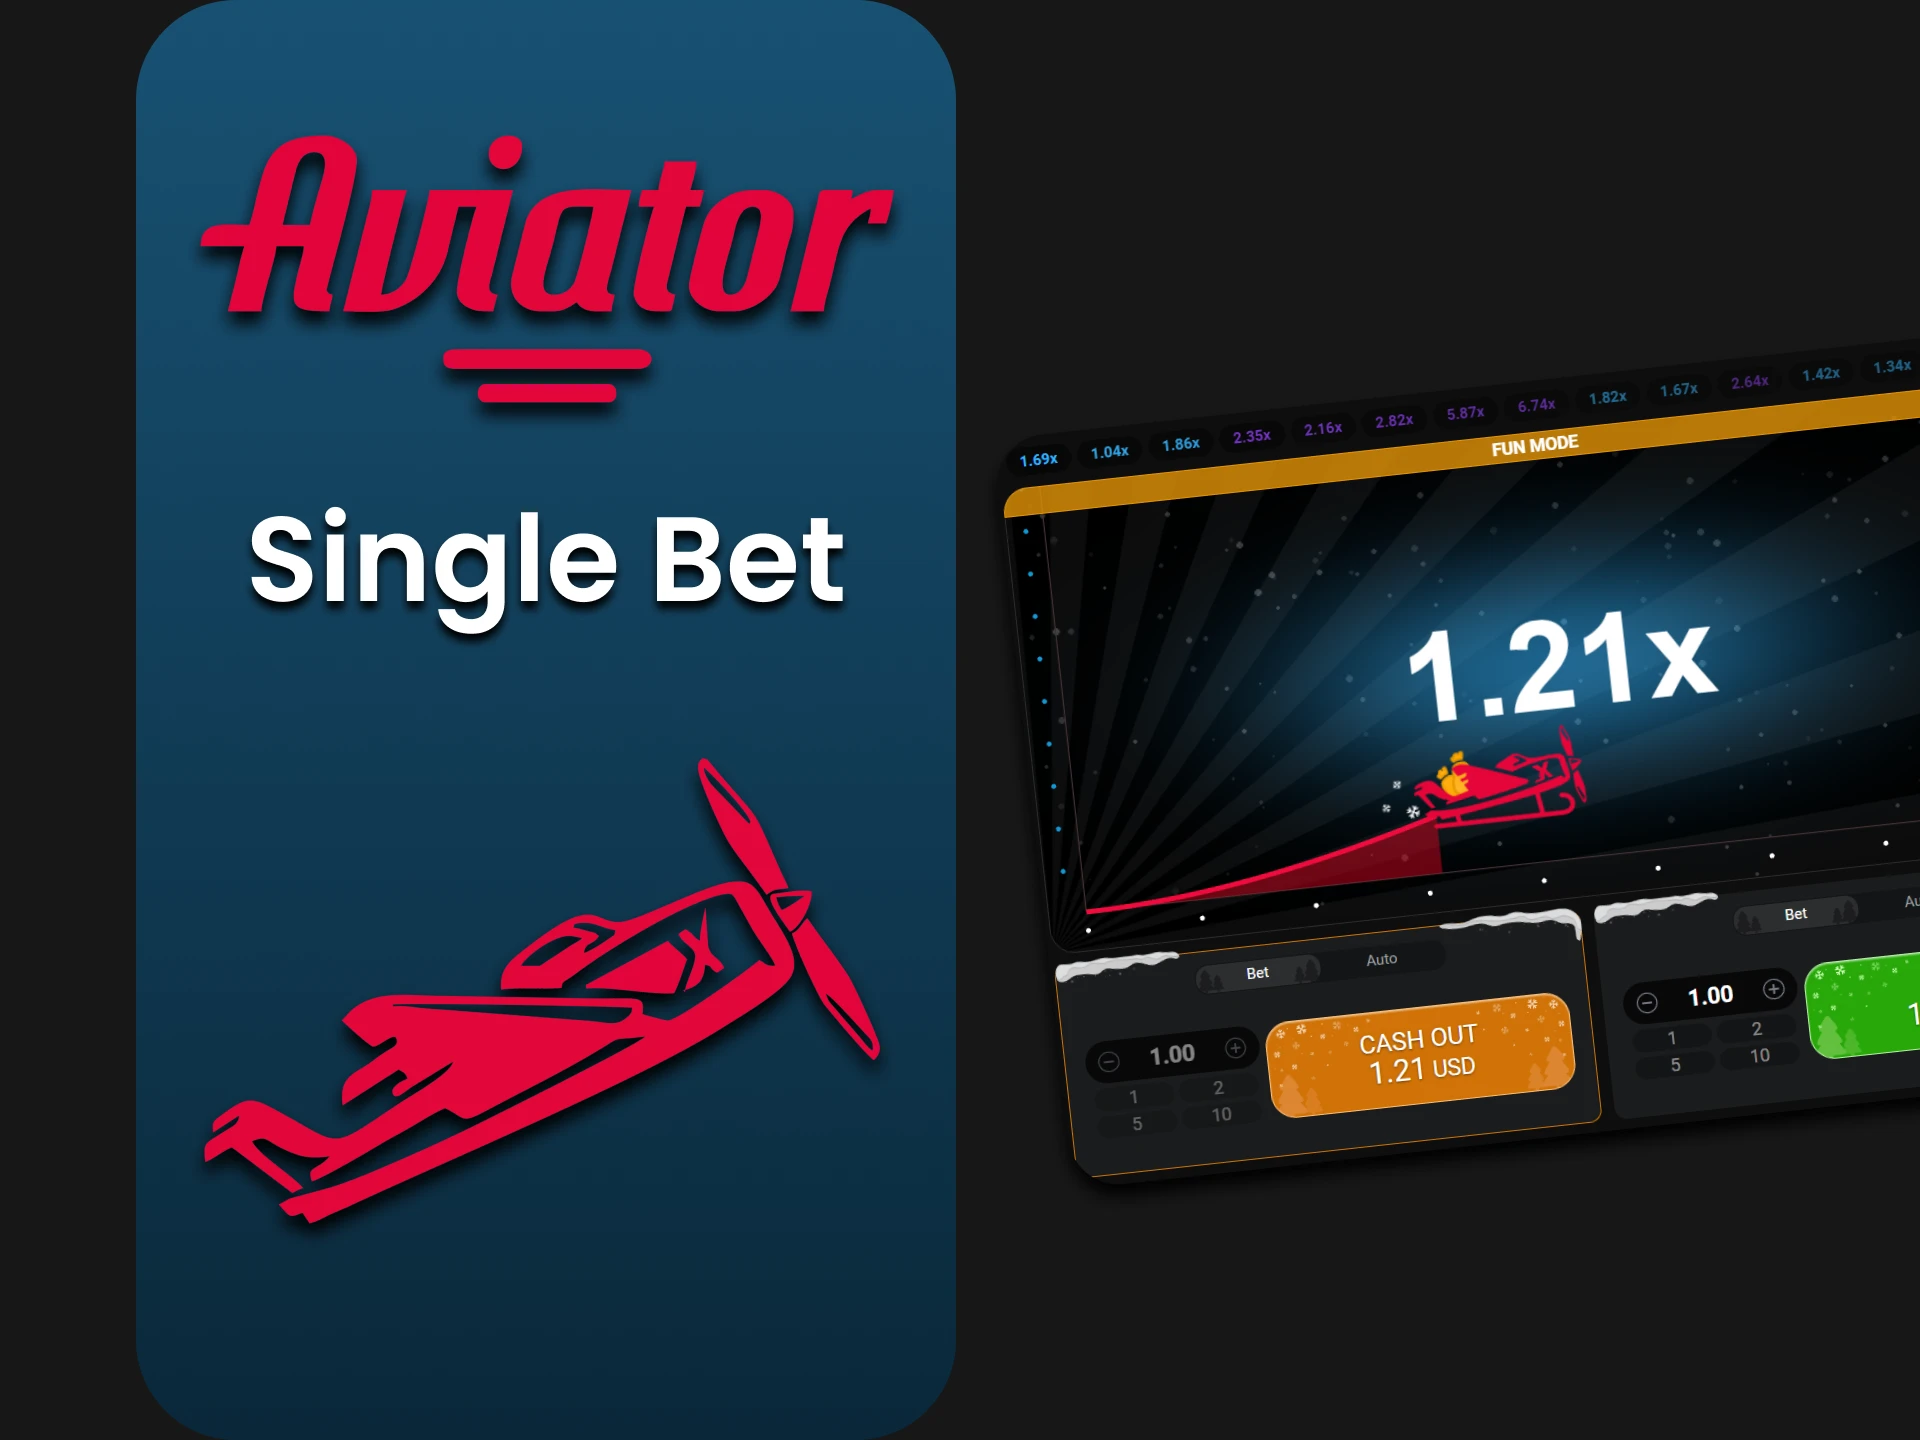 We will tell you about the Single Bet strategy for Aviator.